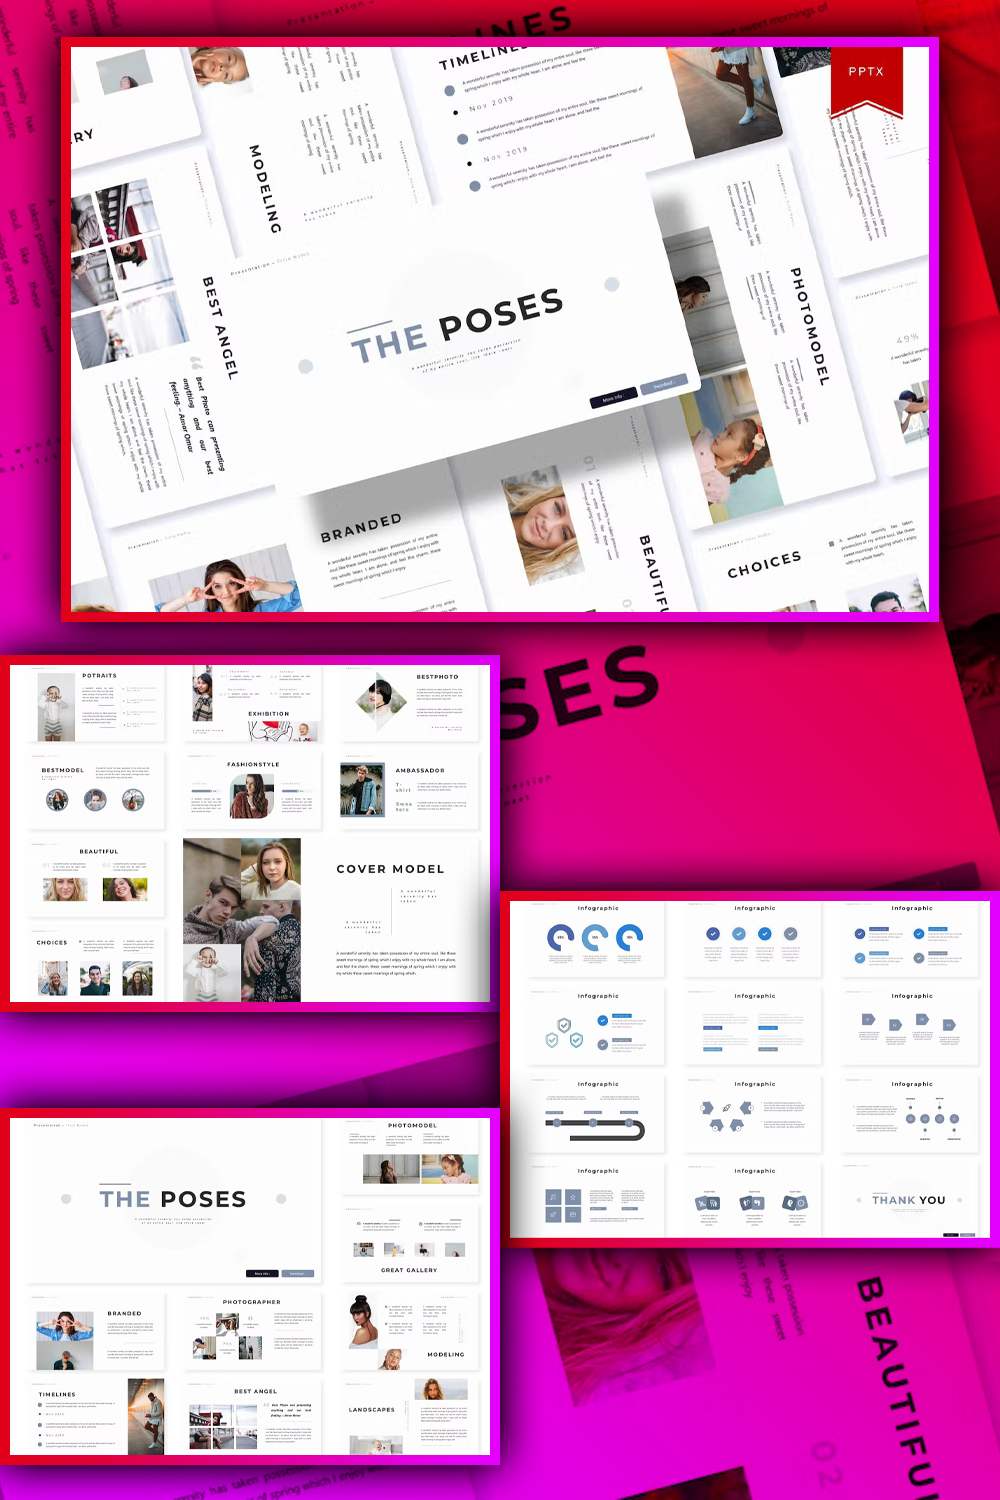 Illustrations the poses powerpoint template of pinterest.